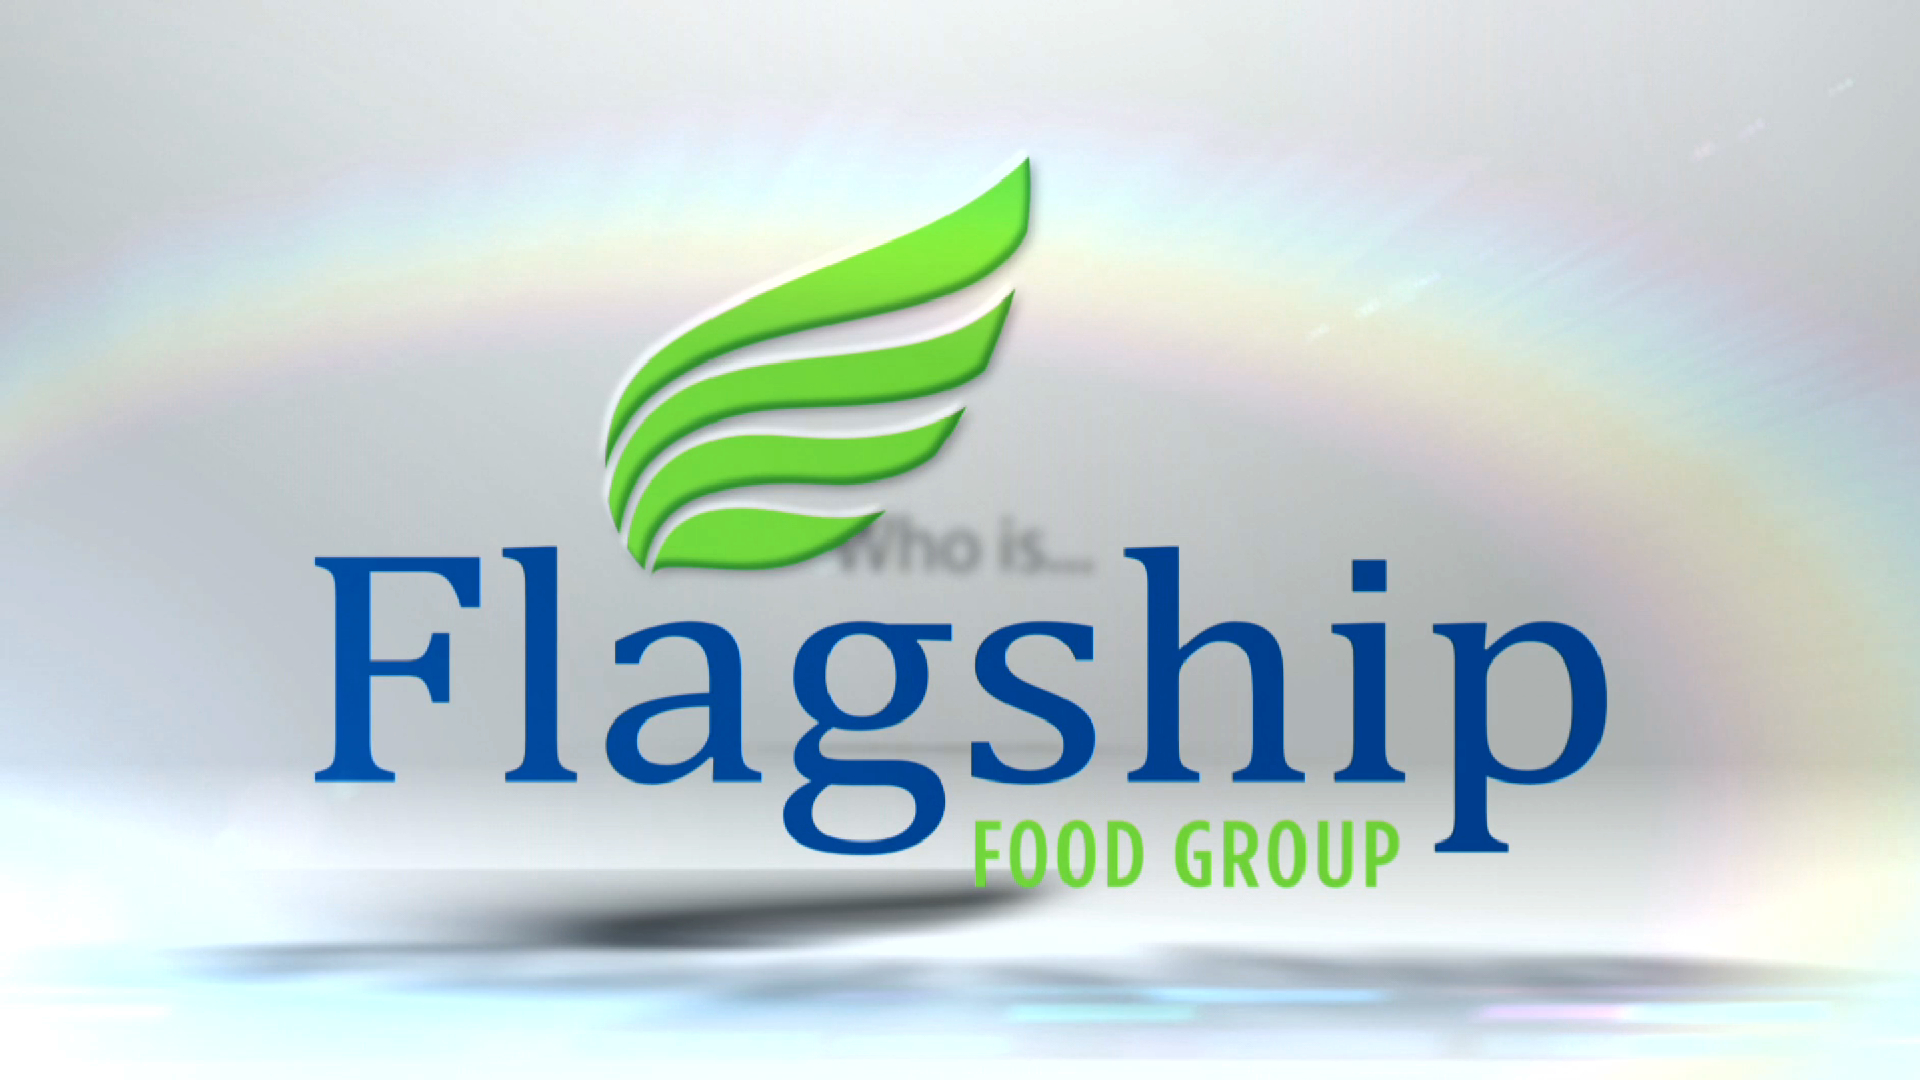 Los Angeles production company Tiger House Films Flagship Food Group commercial